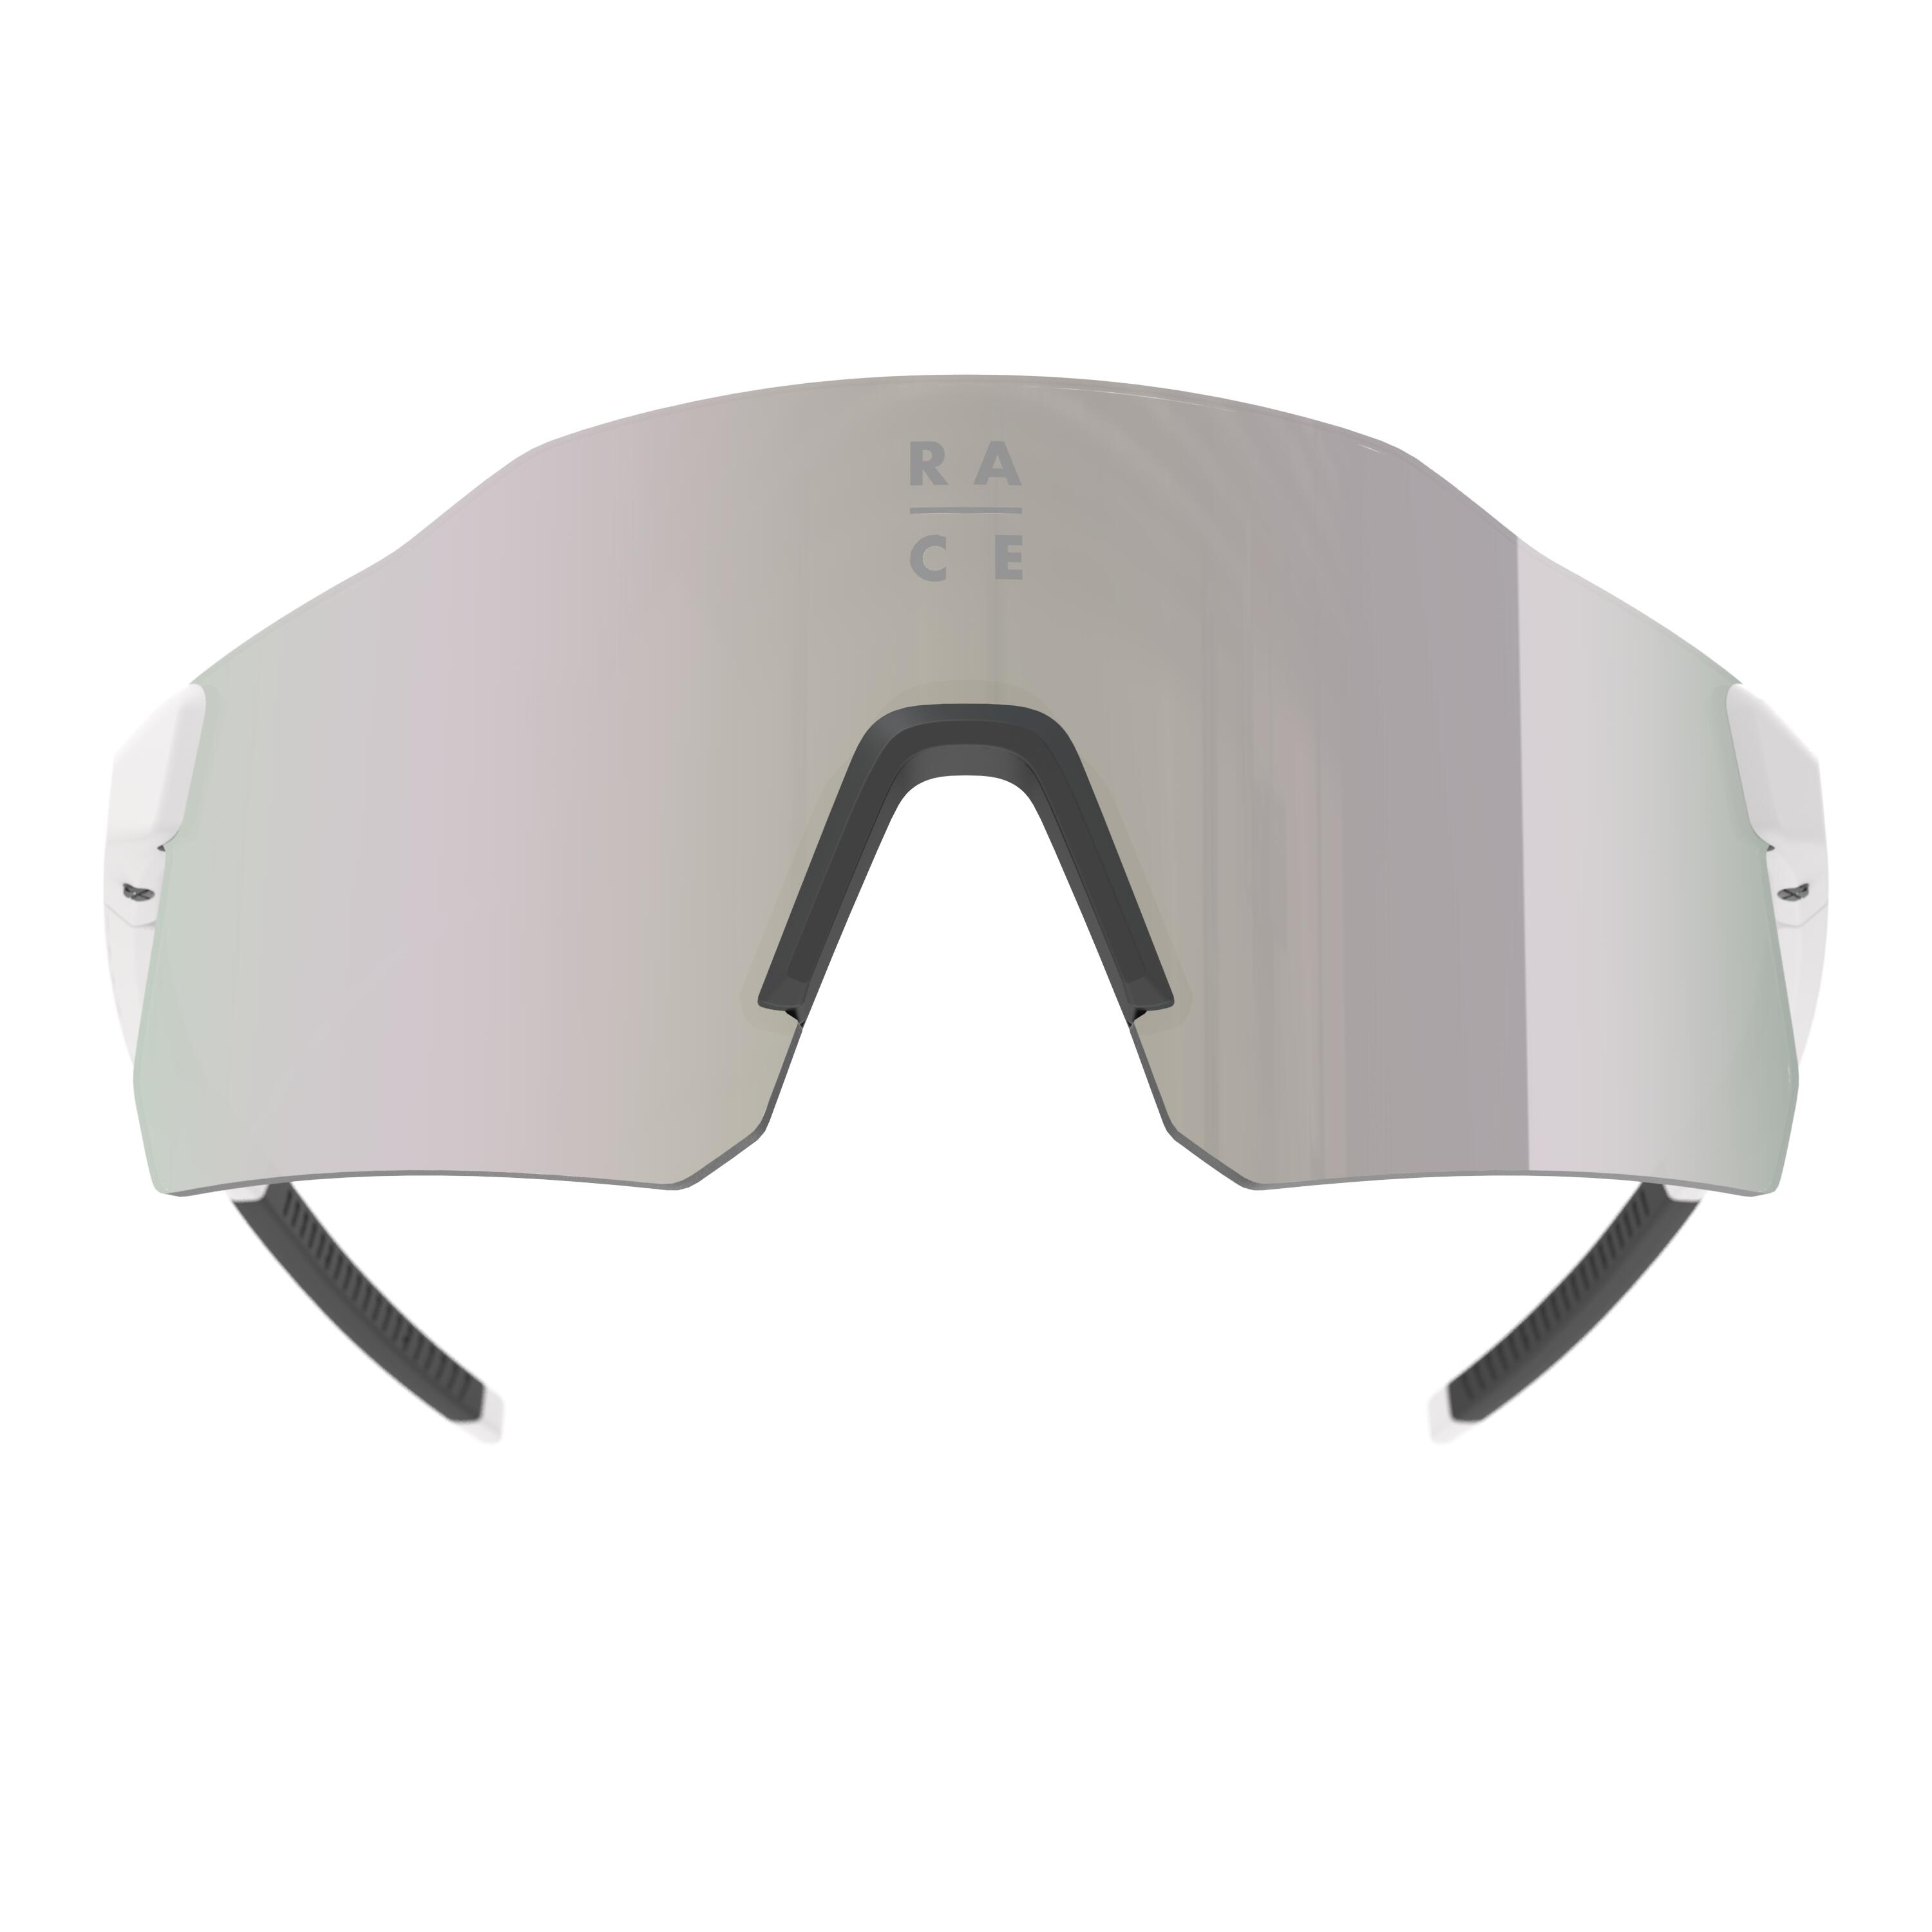 Adult Cycling Sunglasses RoadR 920 Category 3 High-Definition